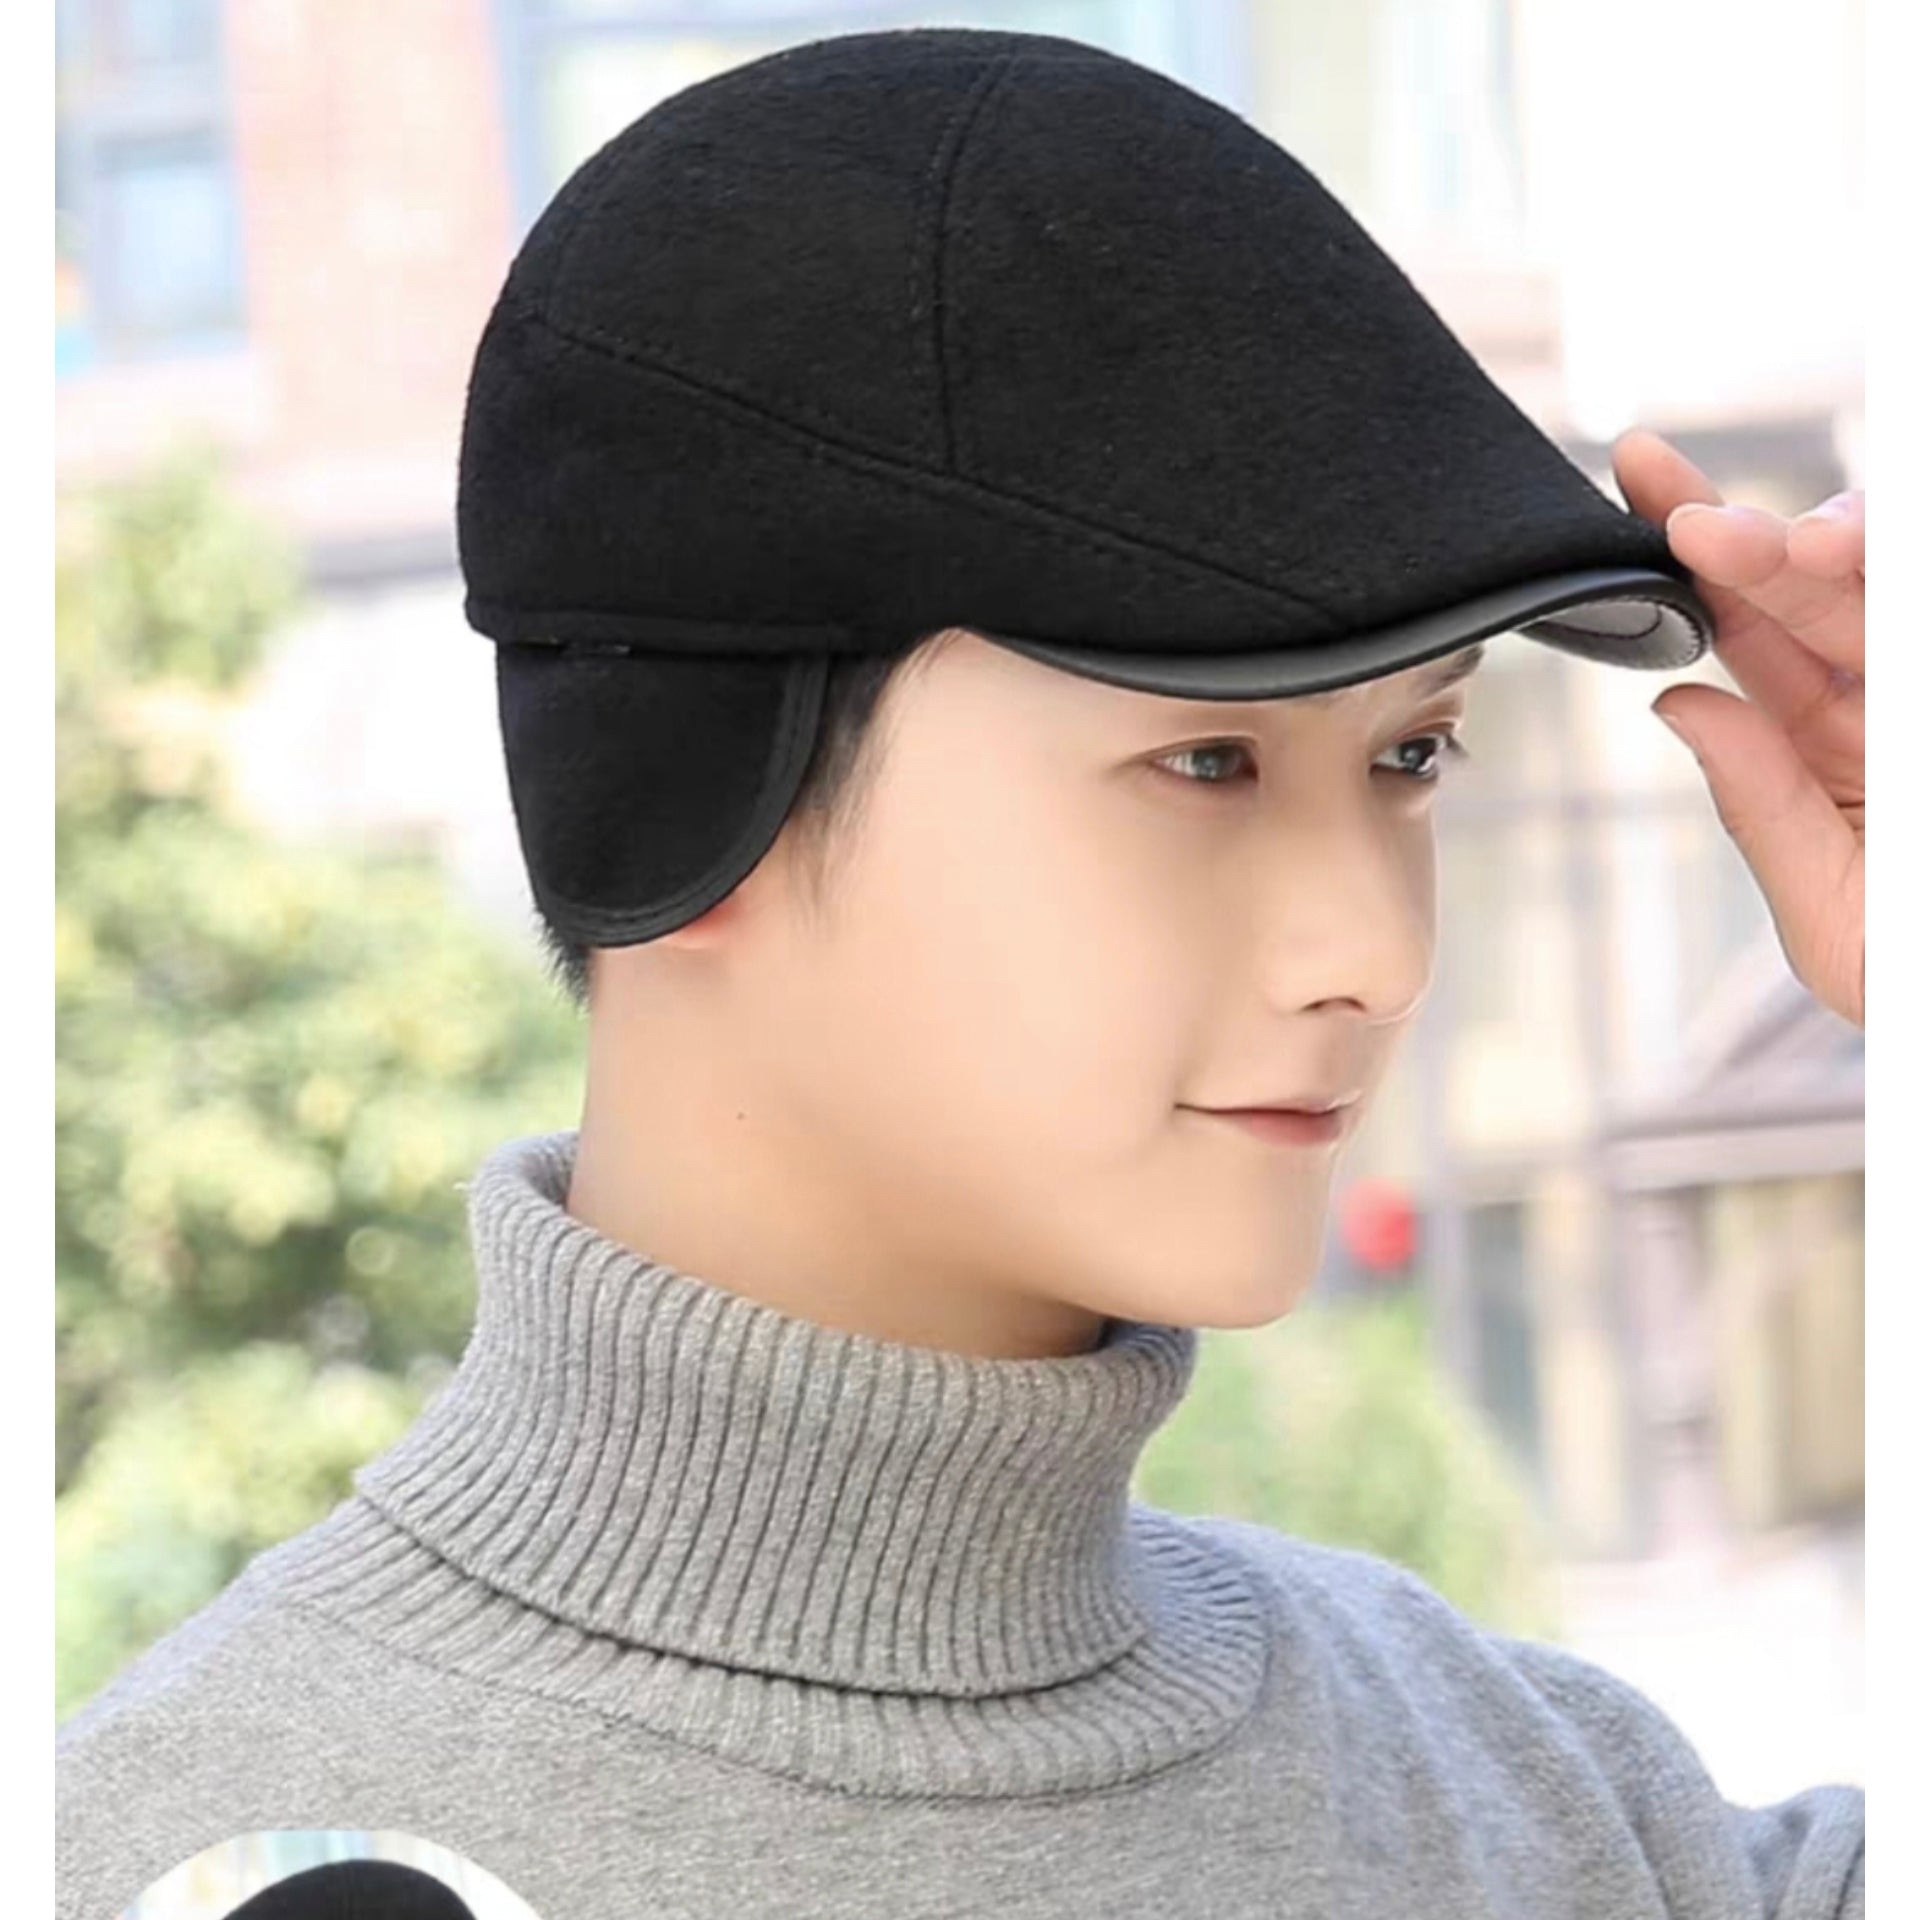 Stylish Winter Warm Beret Hat With adjustable ear muff